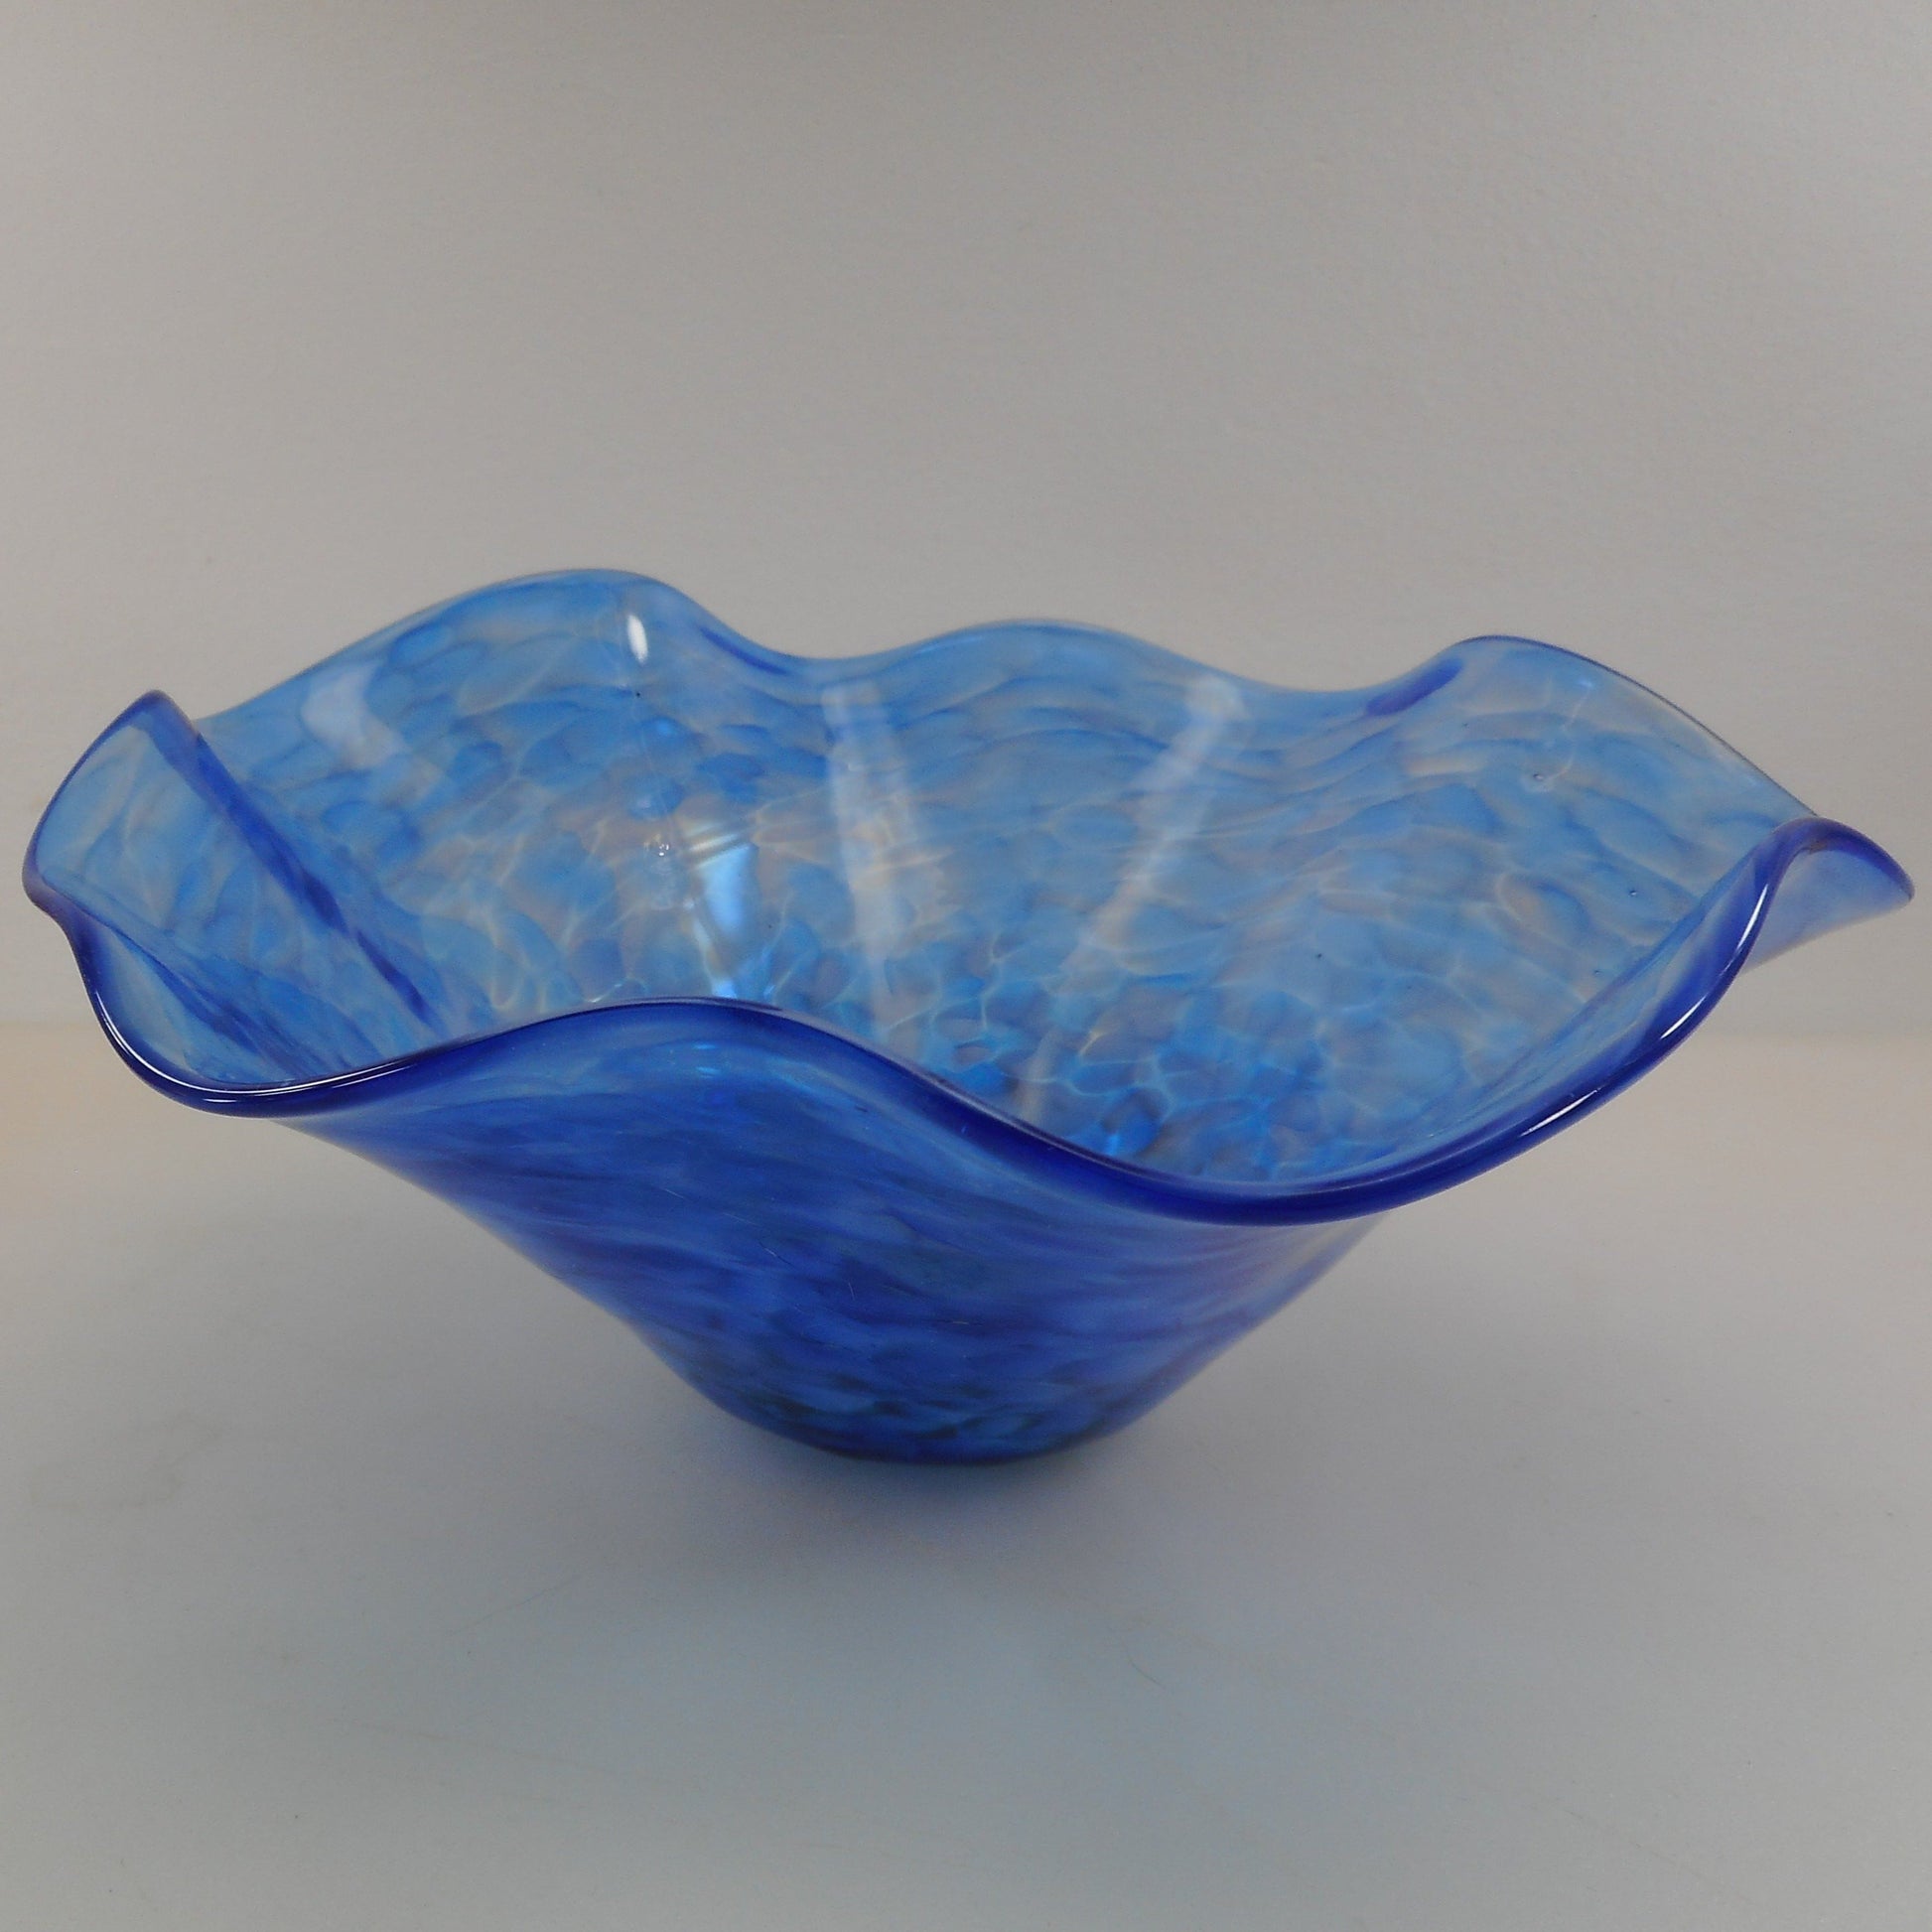 Chad Moriarty Signed Blown Art Glass Bowl 9" - Blue Yellow White